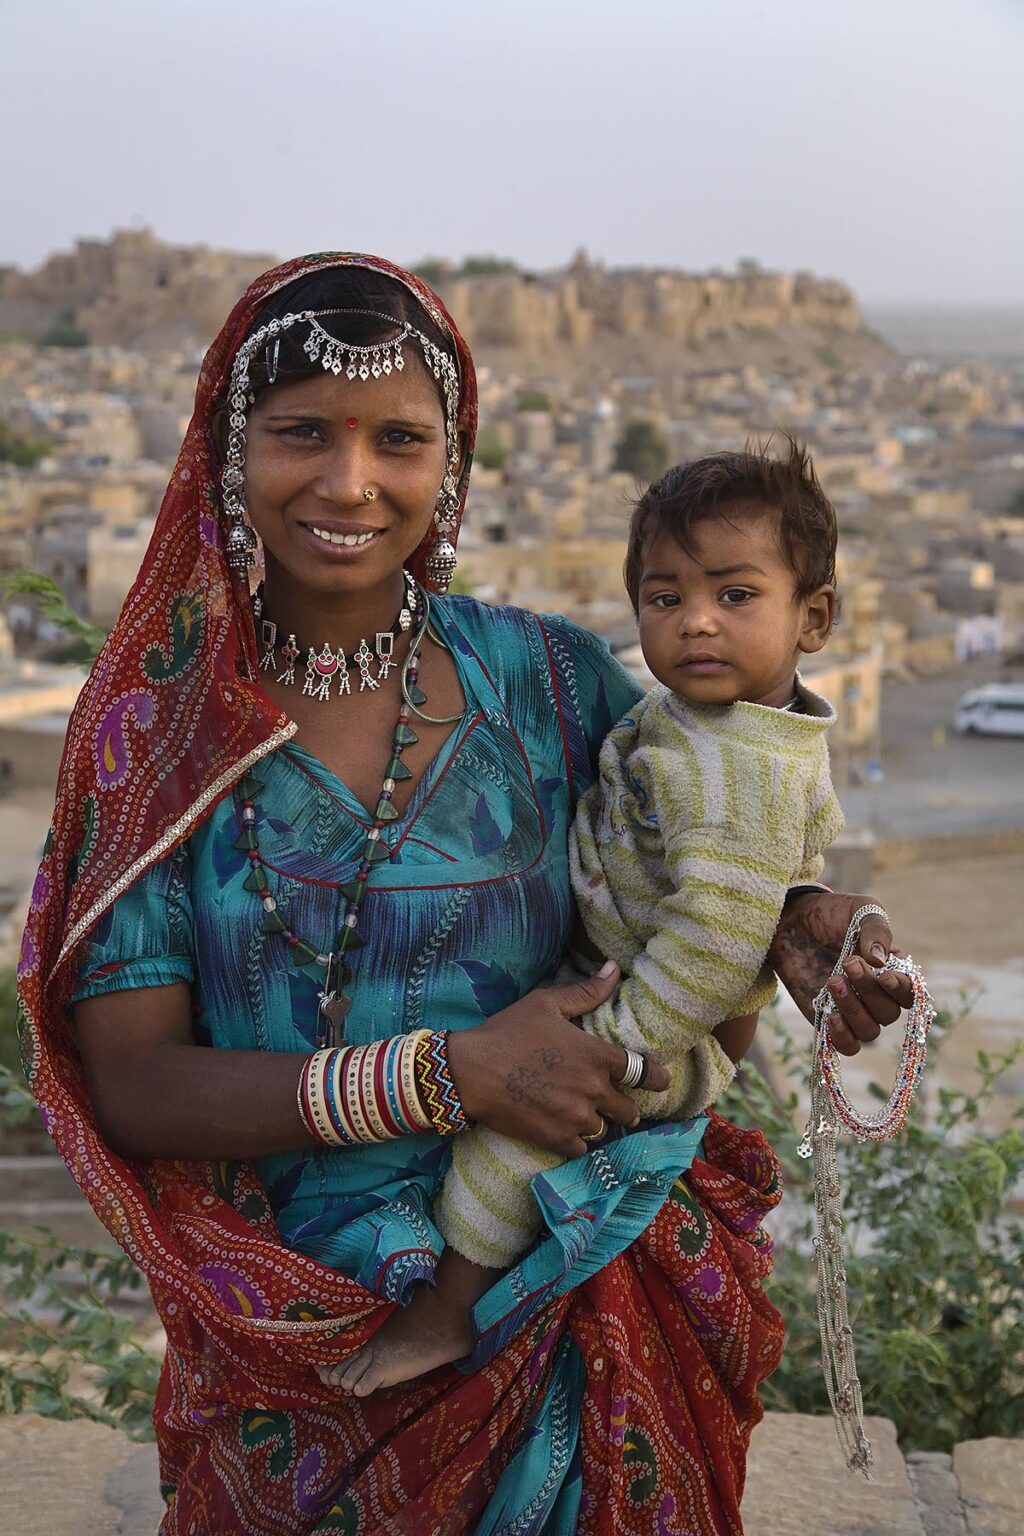 A BANJARI TRIBAL WOMAN and her son with traditional silver jewelry in the GOLDEN CITY of JAISALMER - RAJASTHAN, INDIA